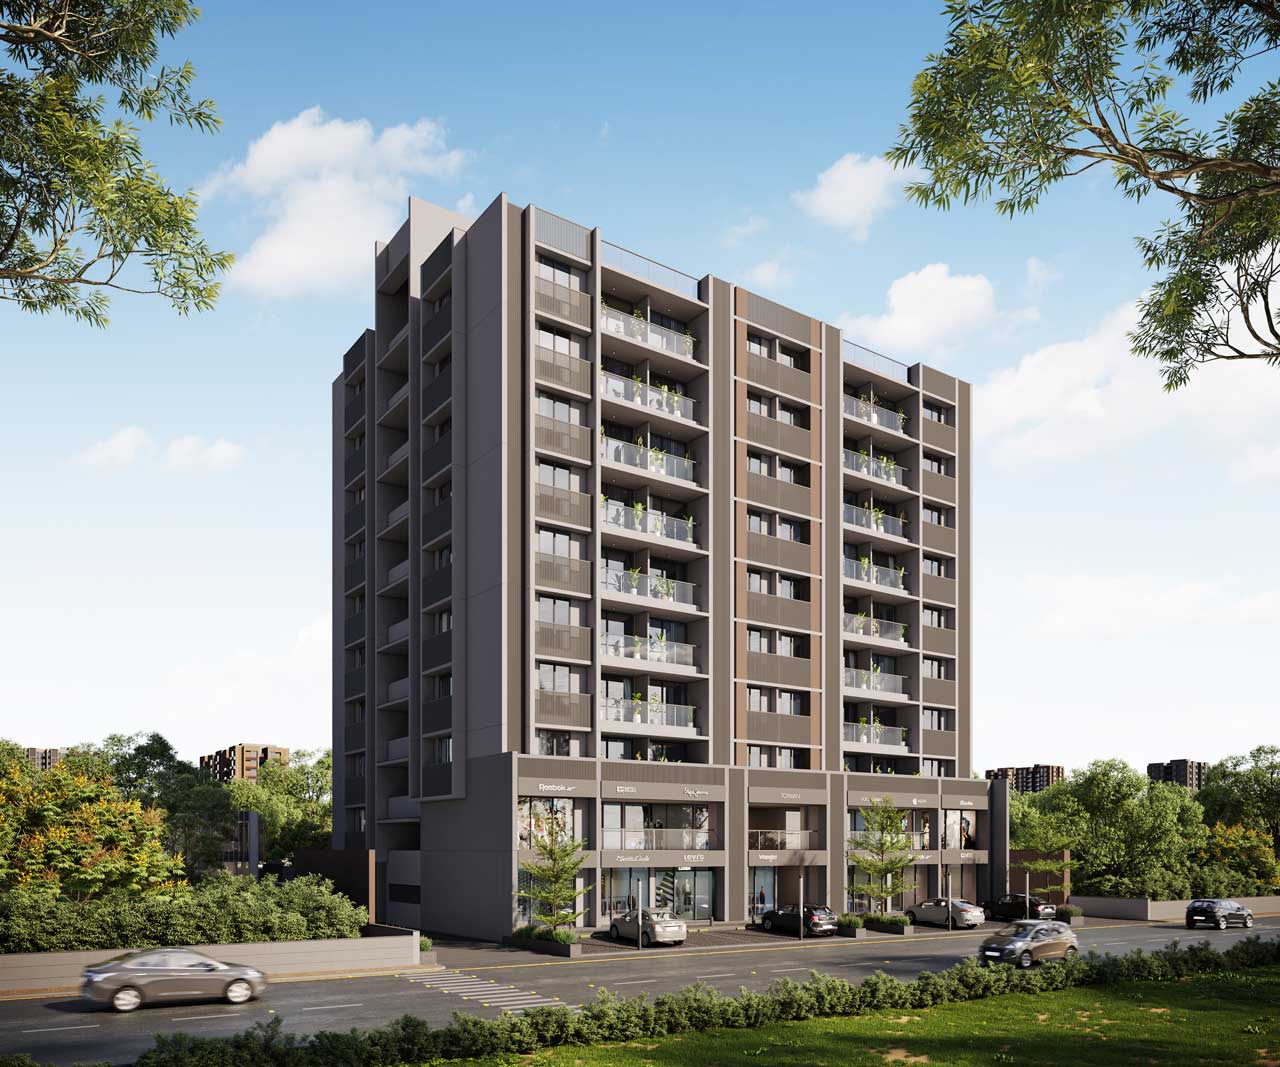 2 & 3 BHK Flats in Ahmedabad